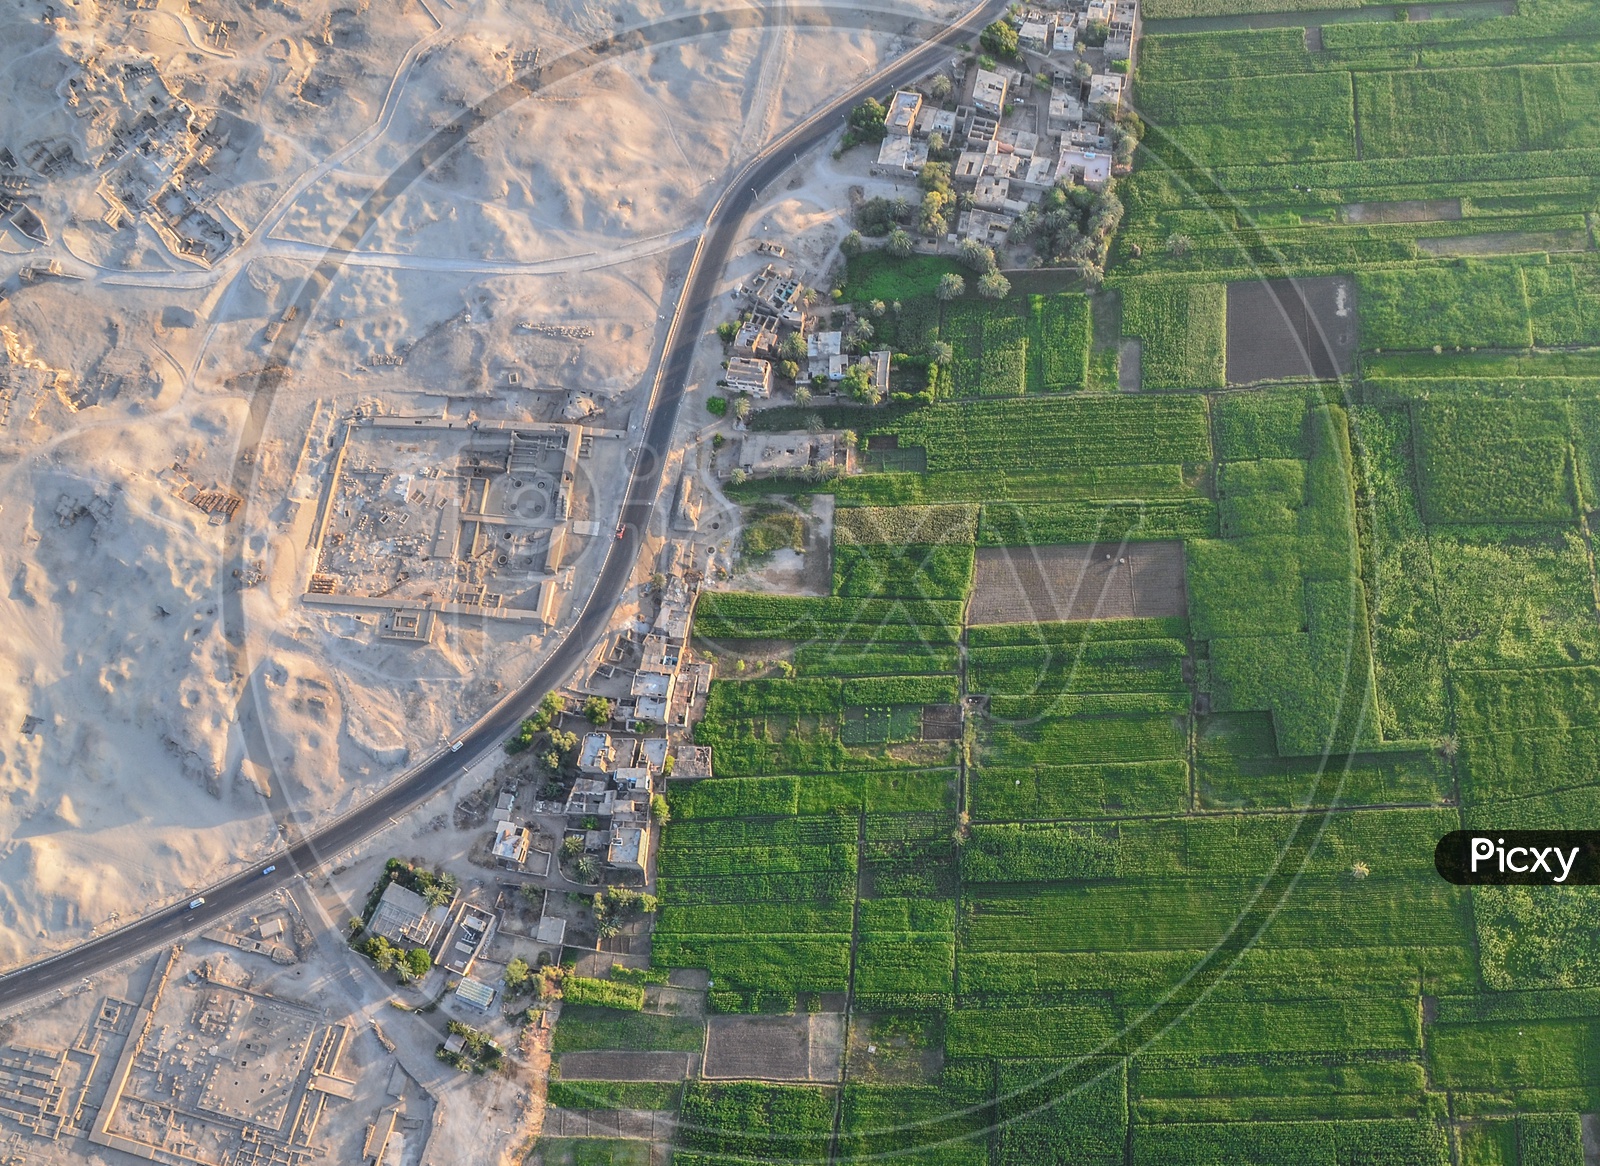 Aerial shot of half Azab Desert (non cultivated lands) and half agricultural lands in Luxor, Egypt taken from the hot air balloon.  Ruins of historical buildings can been seen on the left side of the picture.